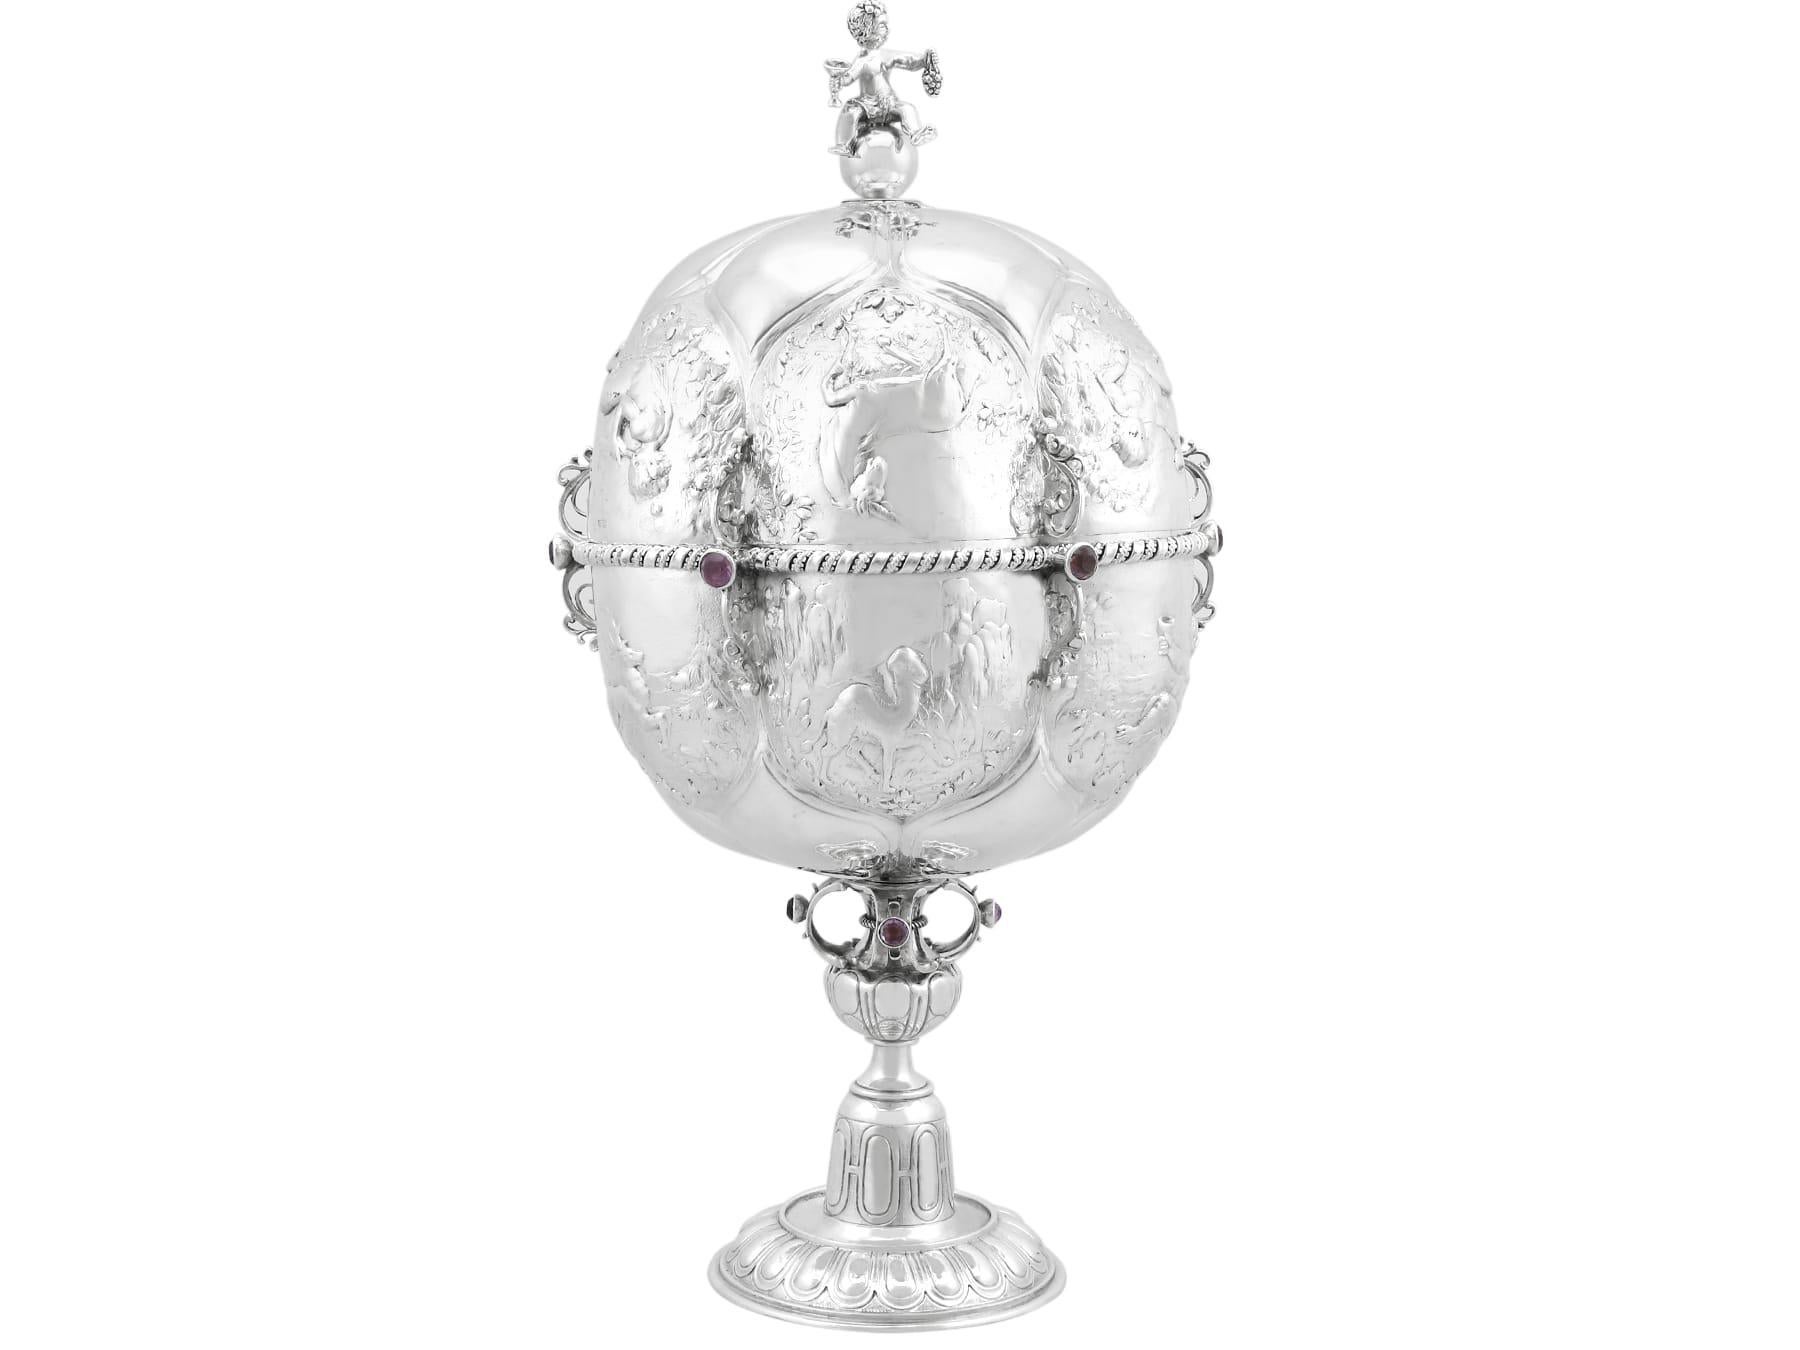 An exceptional, fine and impressive antique German sterling silver cup and cover; an addition to our antique presentation silverware collection.

This exceptional antique German sterling silver cup & cover has a bulbous circular shaped form onto a